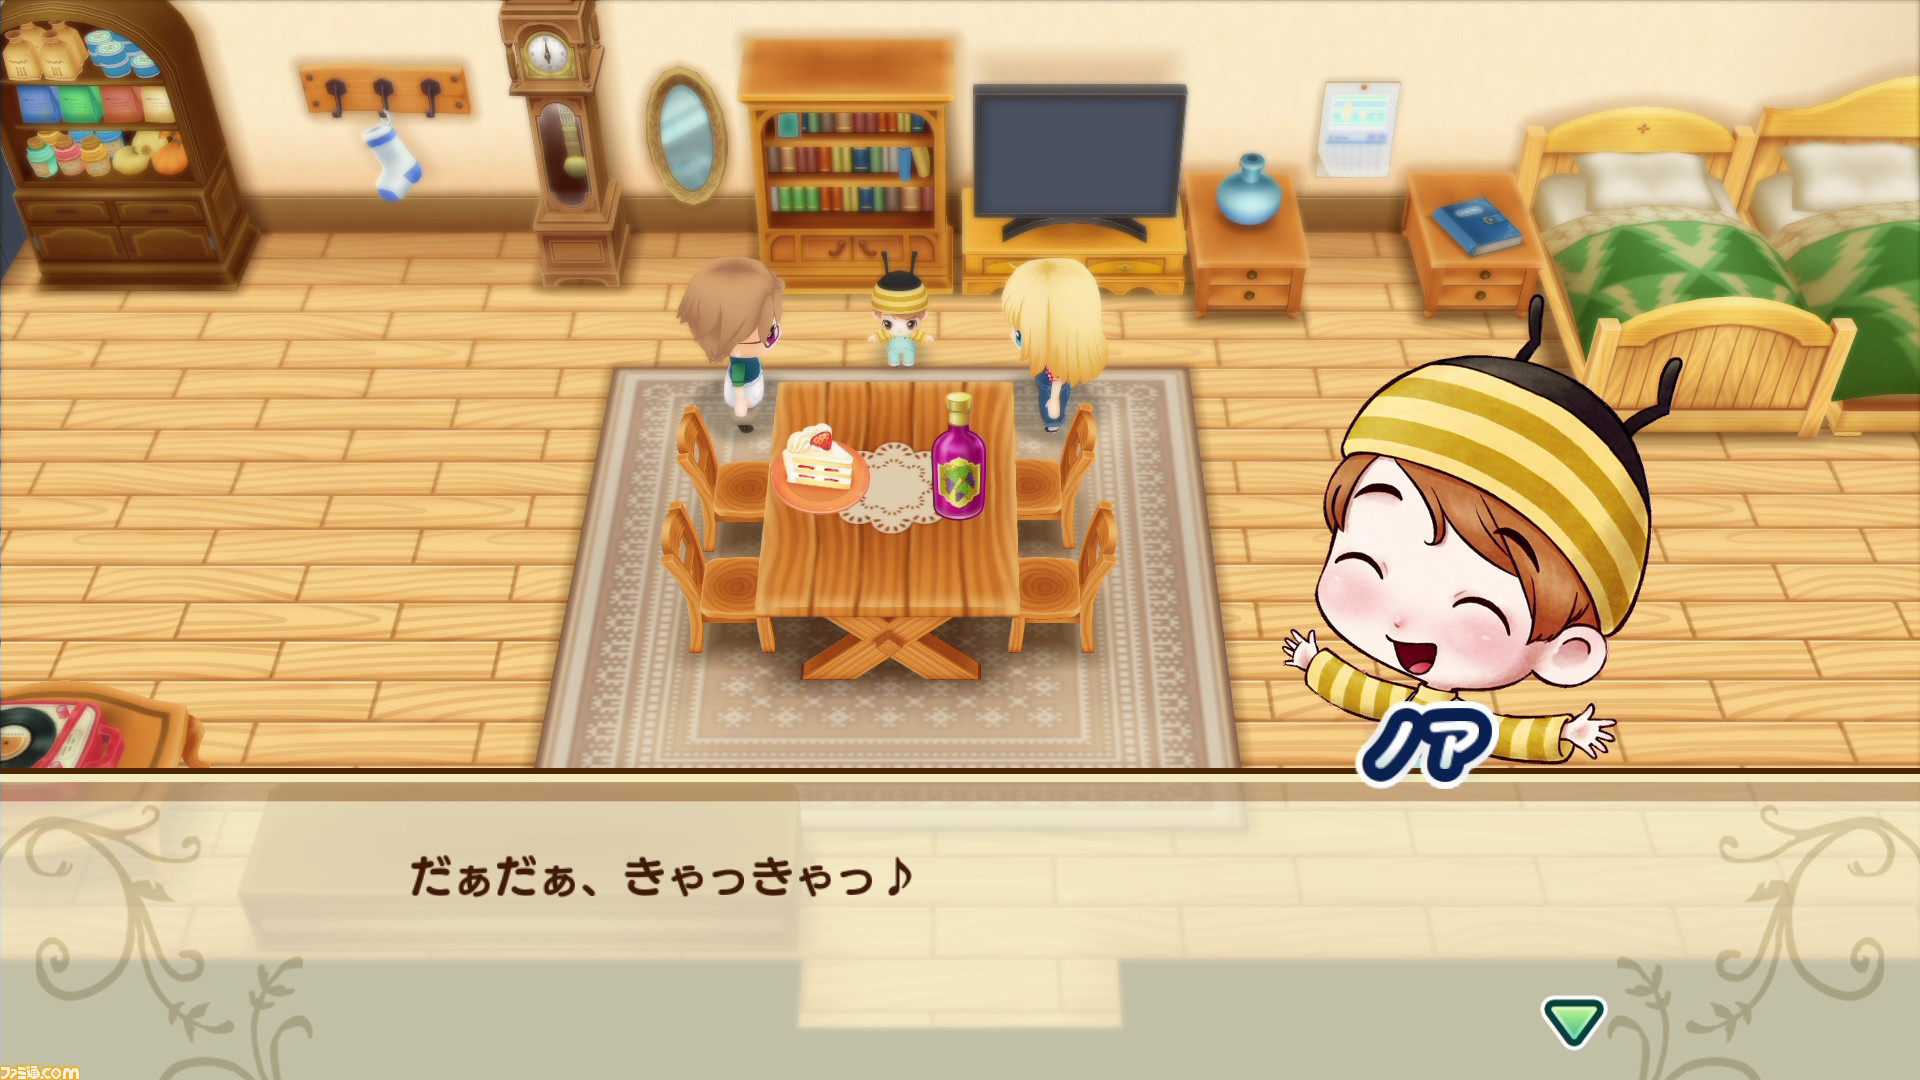 Harvest Moon: Friends of Mineral Town remake coming to Nintendo 